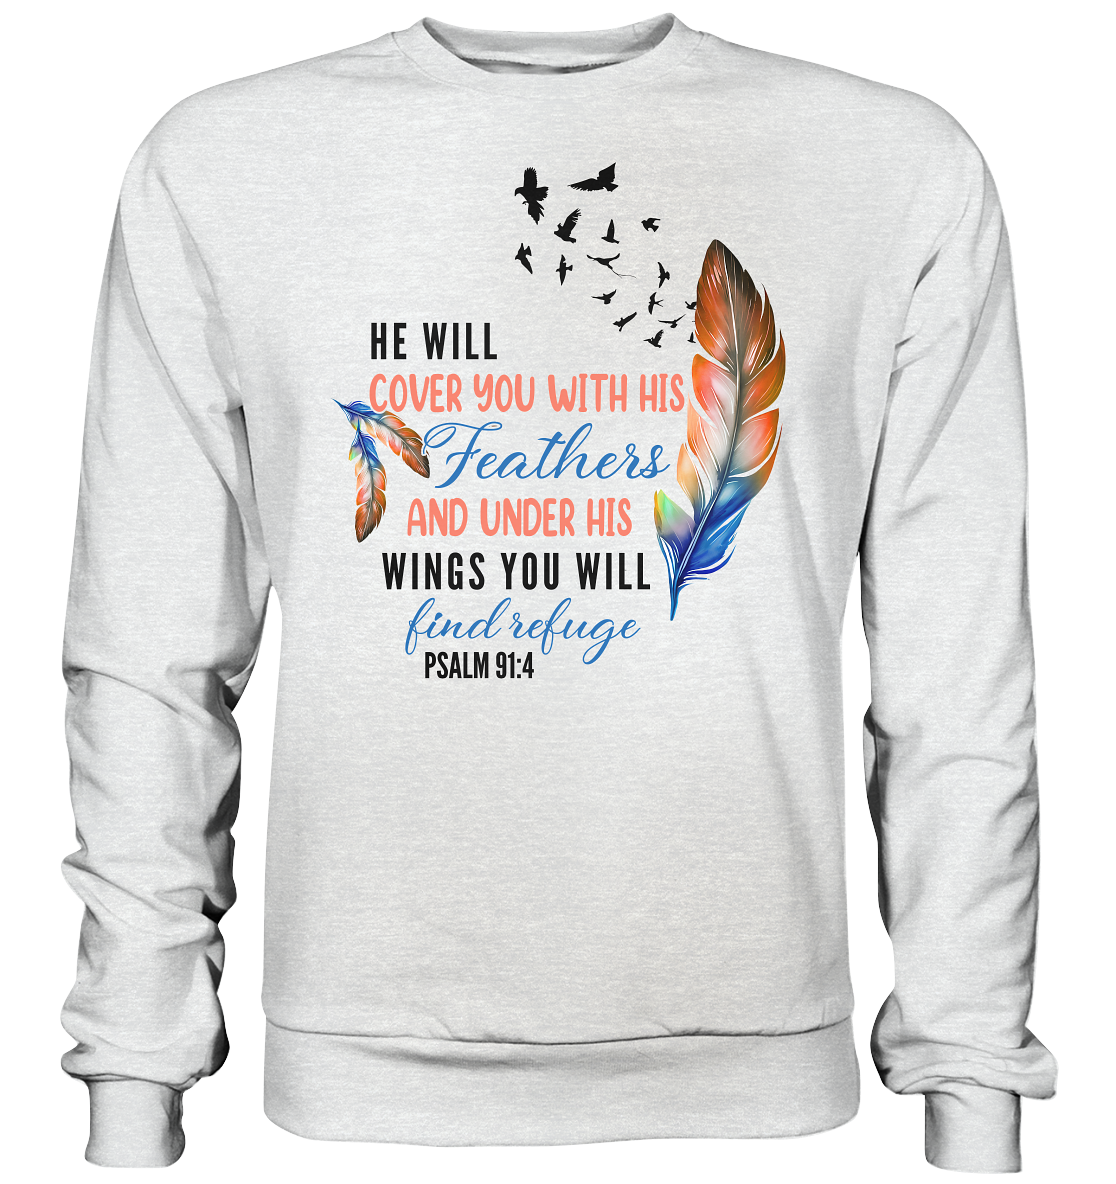 Psalm 91:4 - He will cover you with his Feathers - Premium Sweatshirt